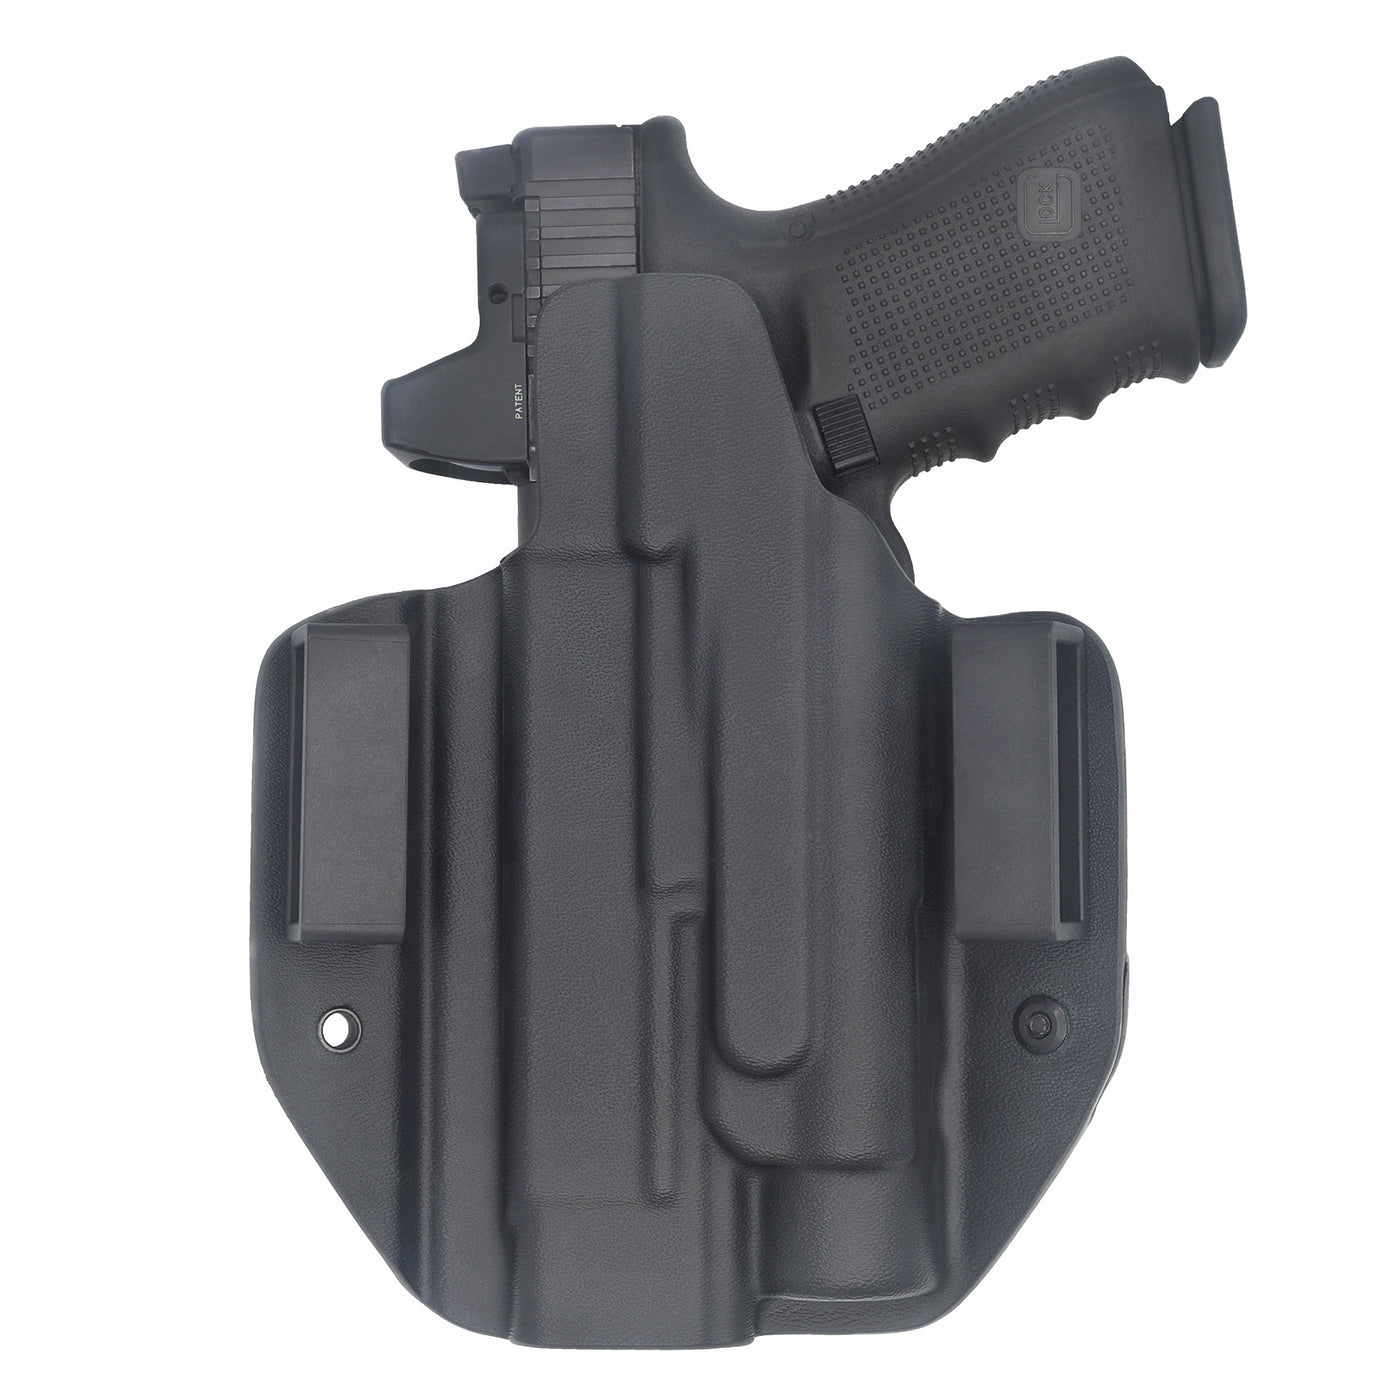 C&G Holsters Custom OWB Tactical CZ P10/c Streamlight TLR-1 in holstered position back view